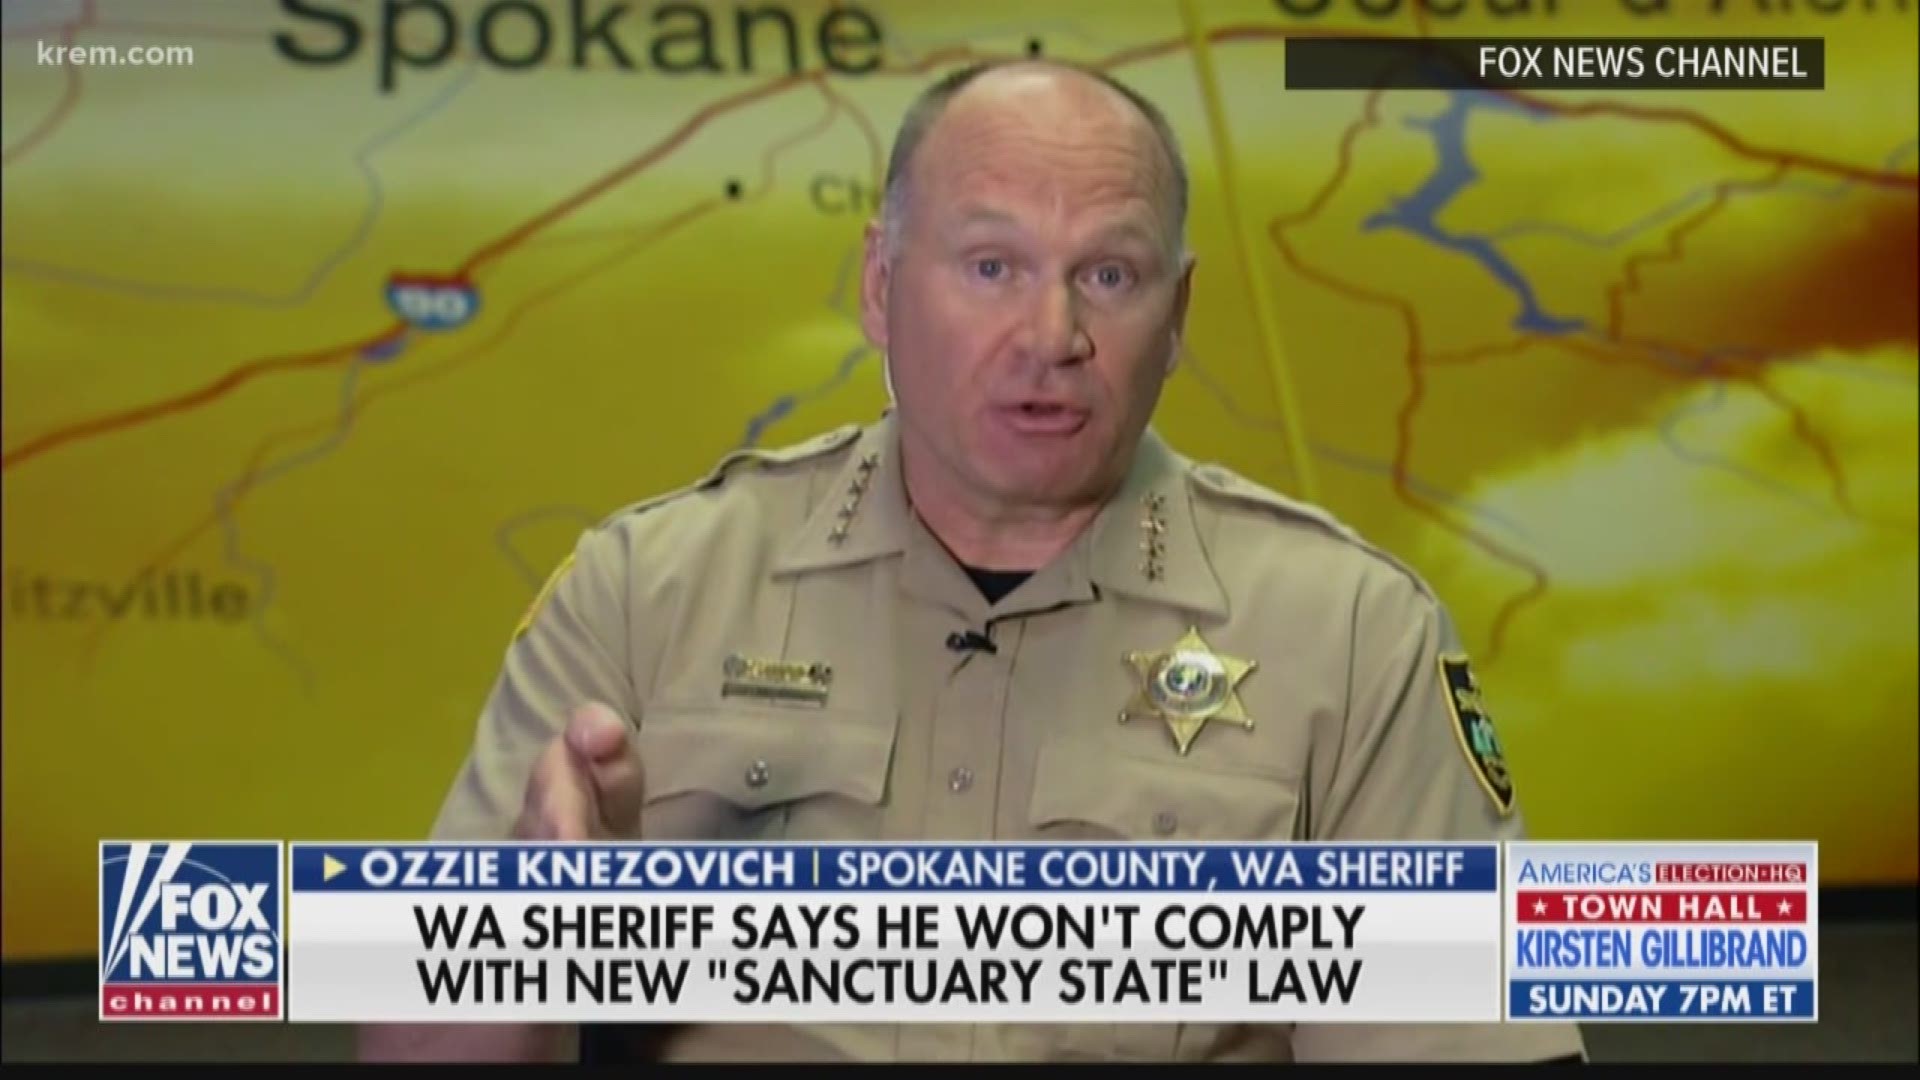 Spokane's sheriff went on Fox News to criticize a new Washington state law that creates new restrictions on how police can handle immigration.